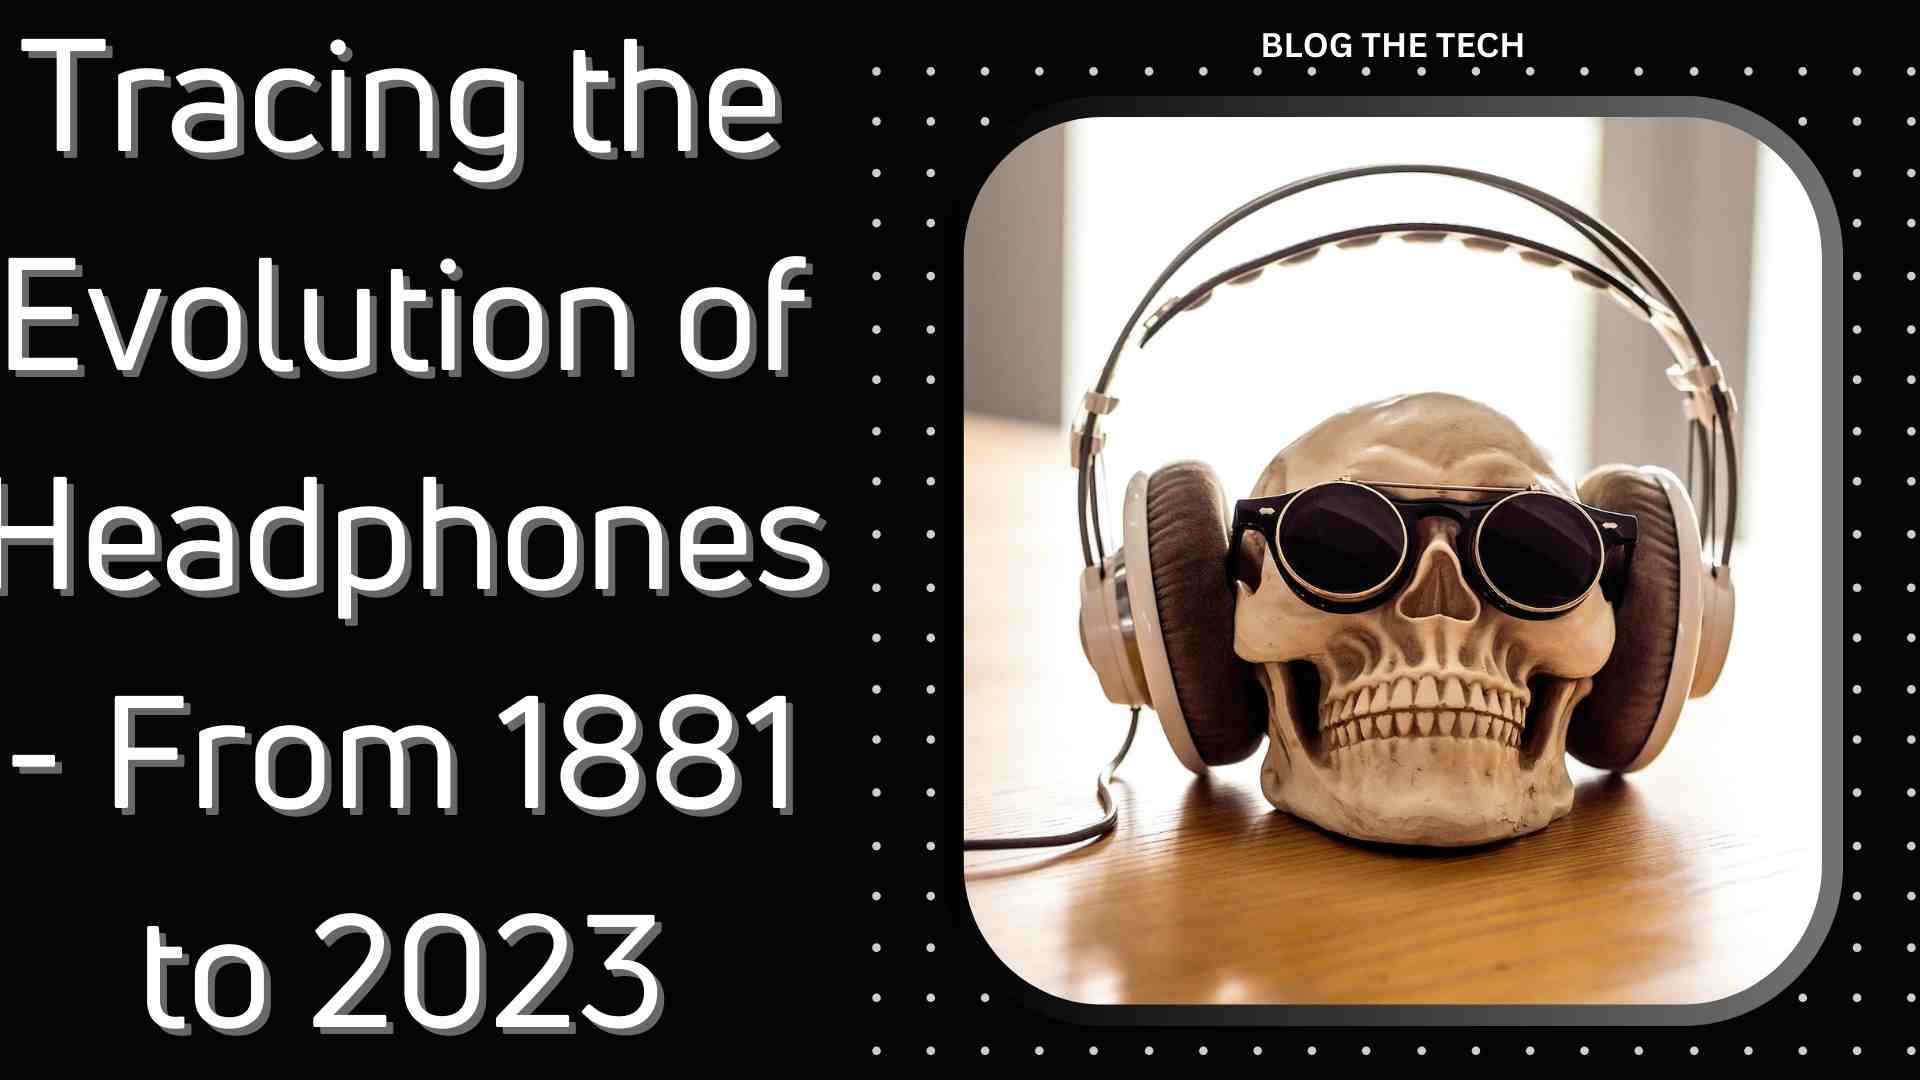 Tracing the Evolution of Headphones - From 1881 to 2023